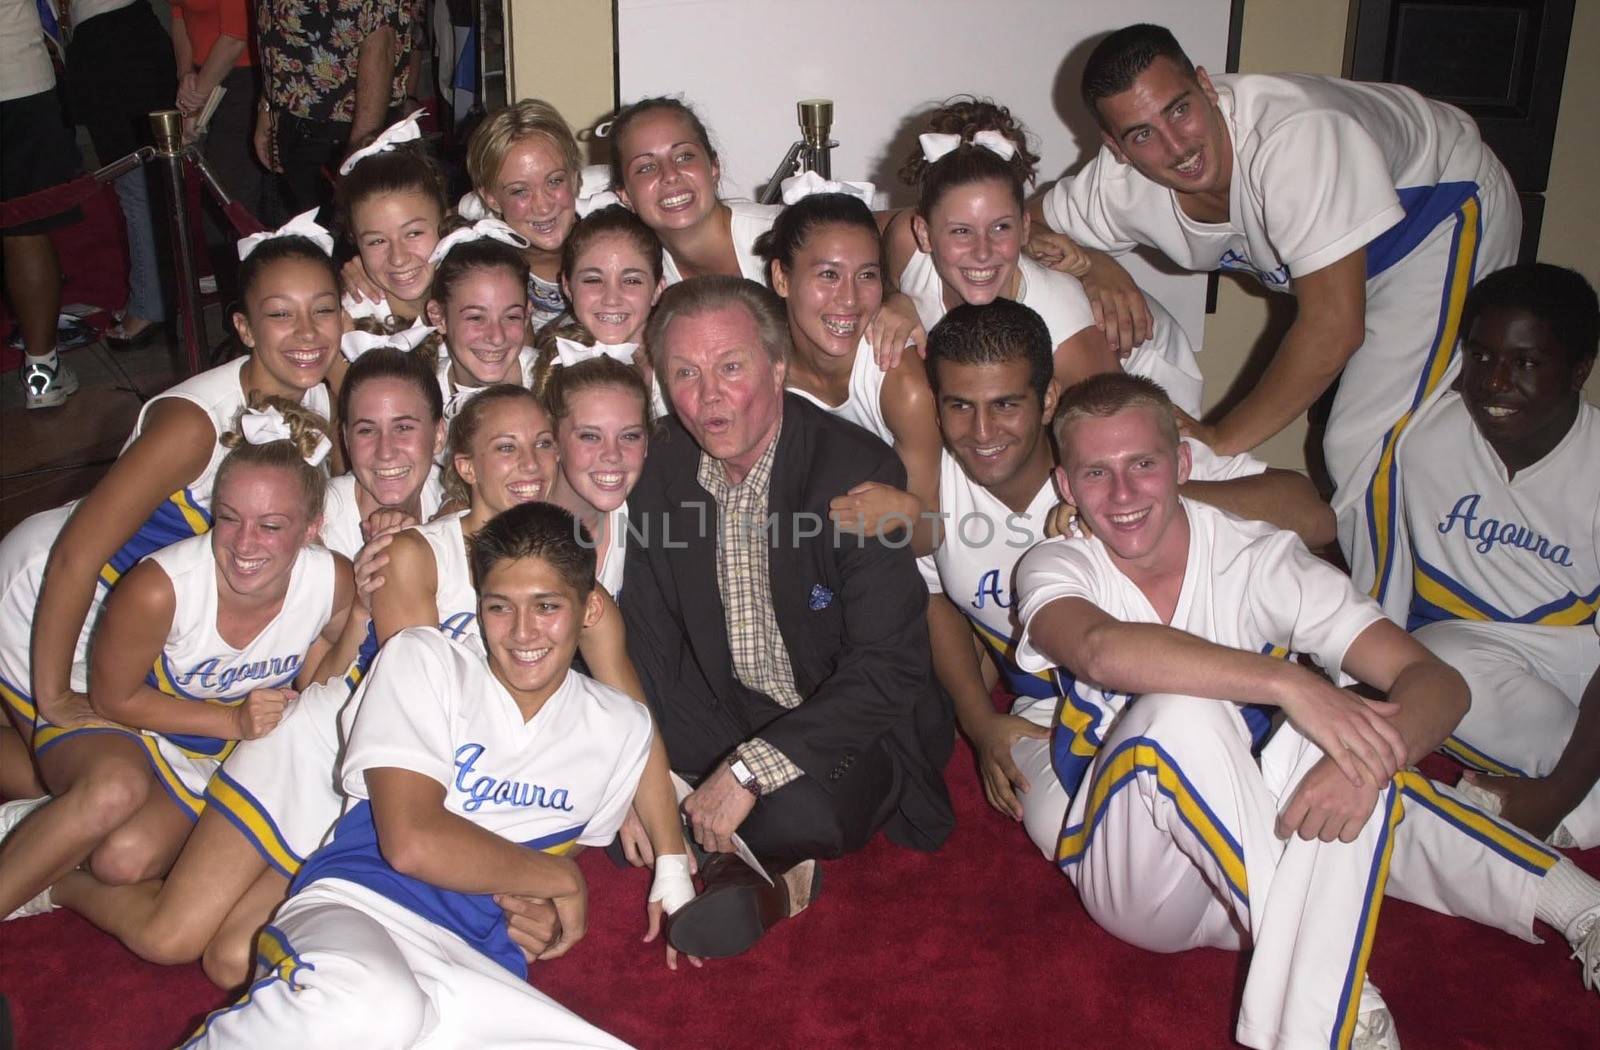 Jon Voight and The Agoura High School Cheerleaders at the premiere of "Bring It On" in Westwood. 08-22-00